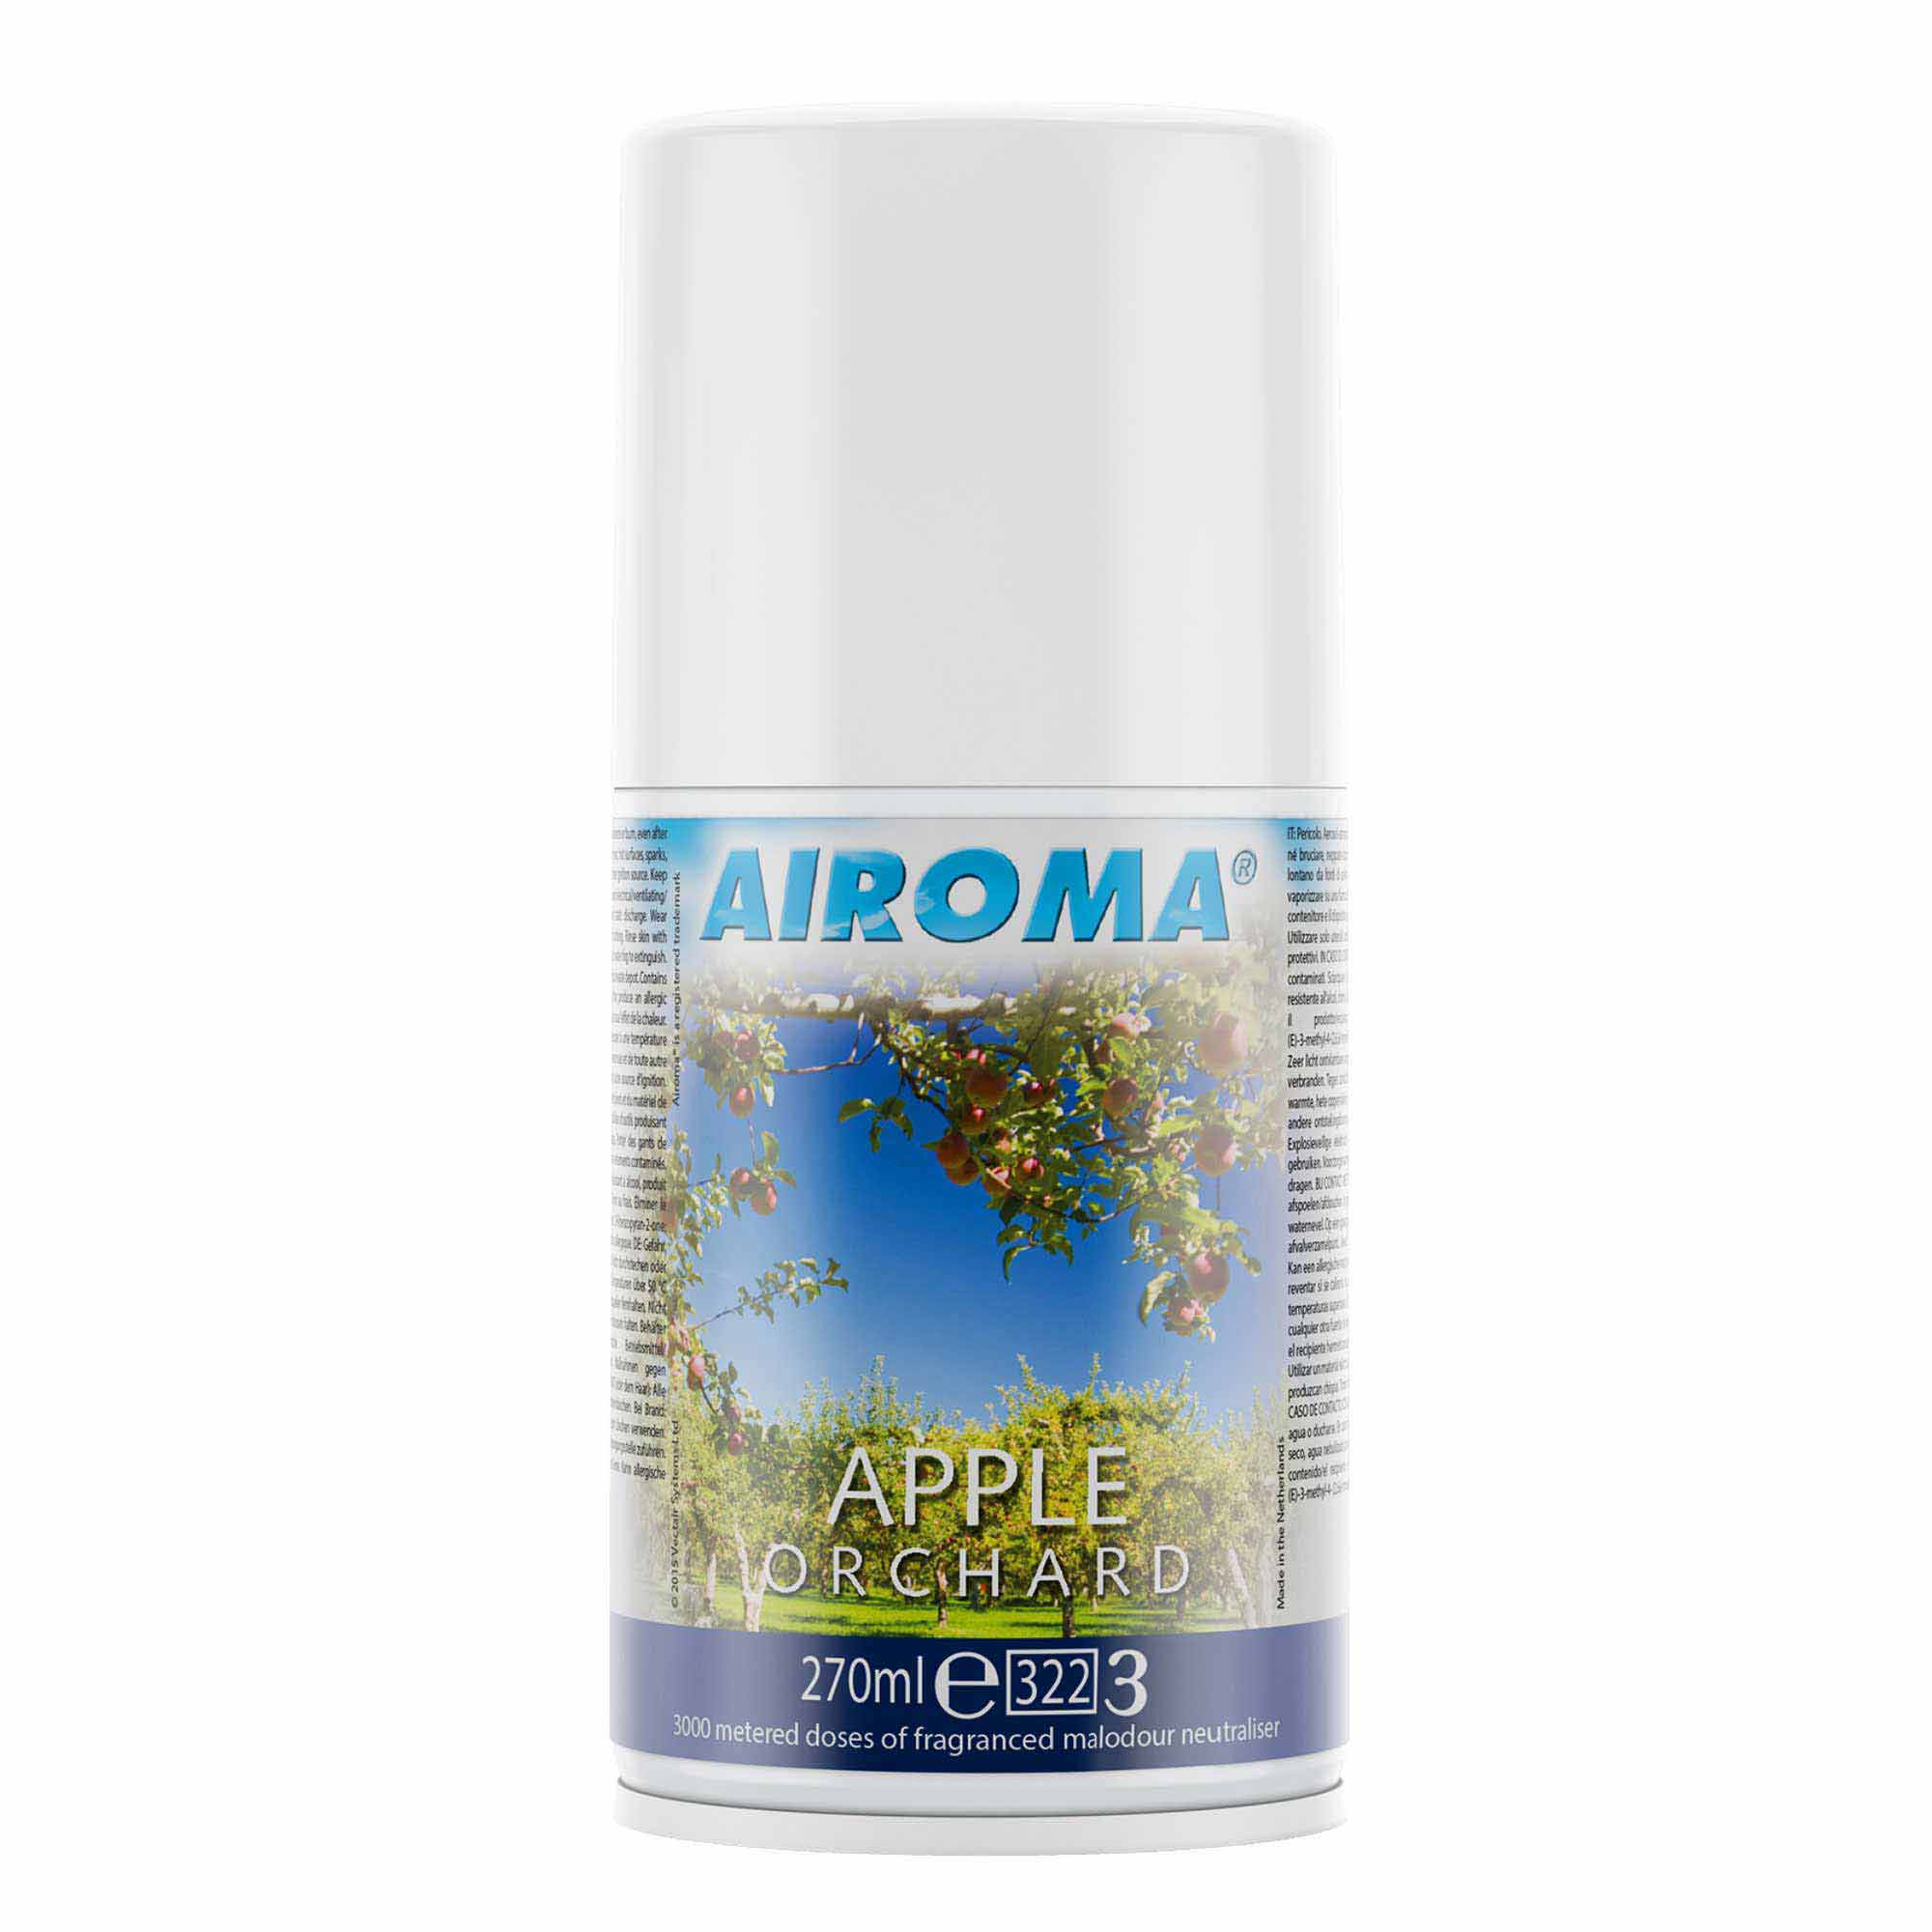 AIROMA REFILL - APPLE ORCHARD LARGE 270